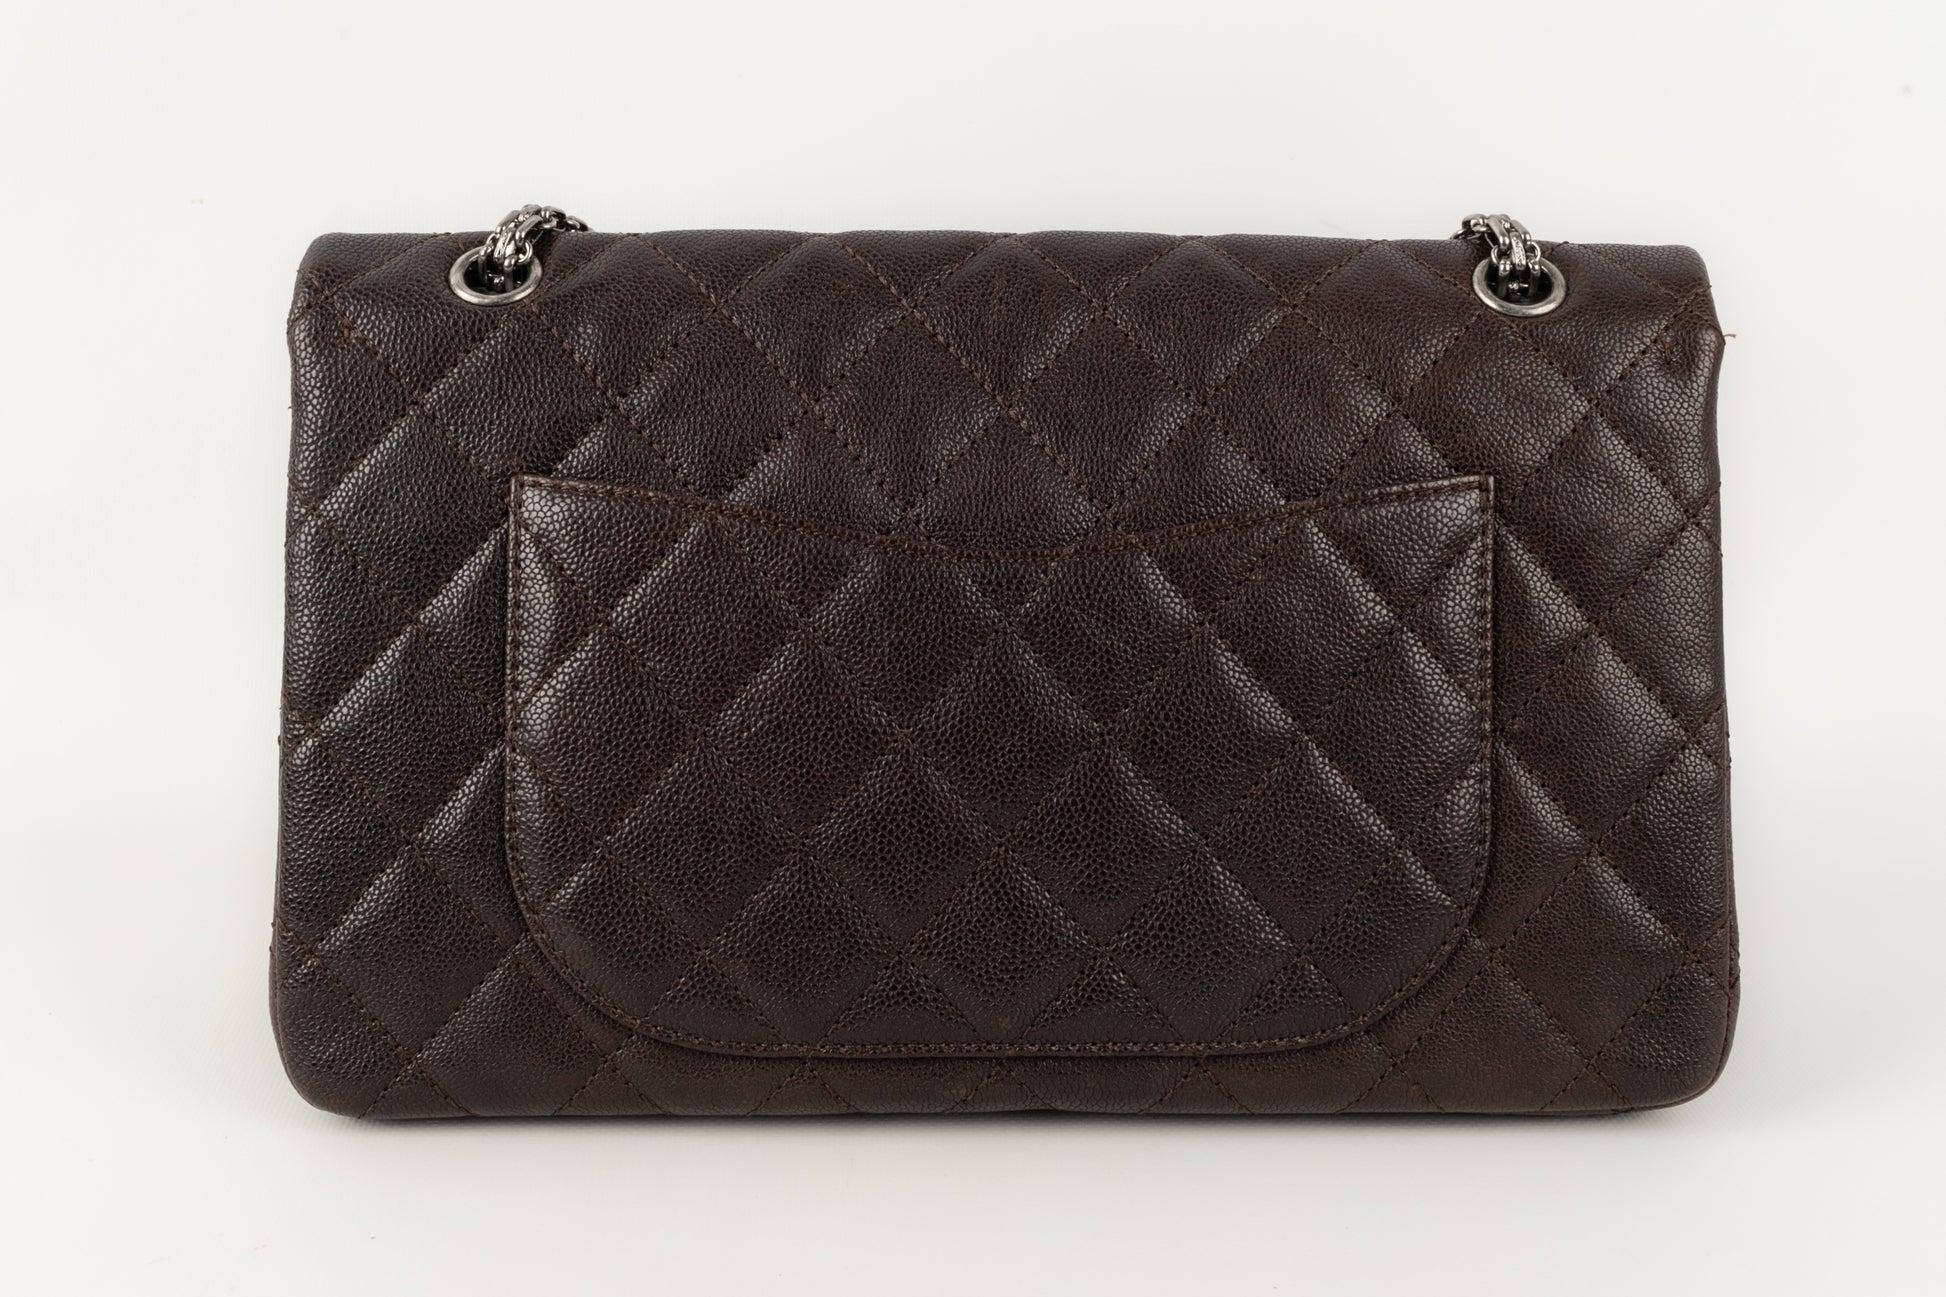 Black Chanel 2.55 Leather & Grain Leather Bag with Silvery Metal Elements, 2010/2011 For Sale